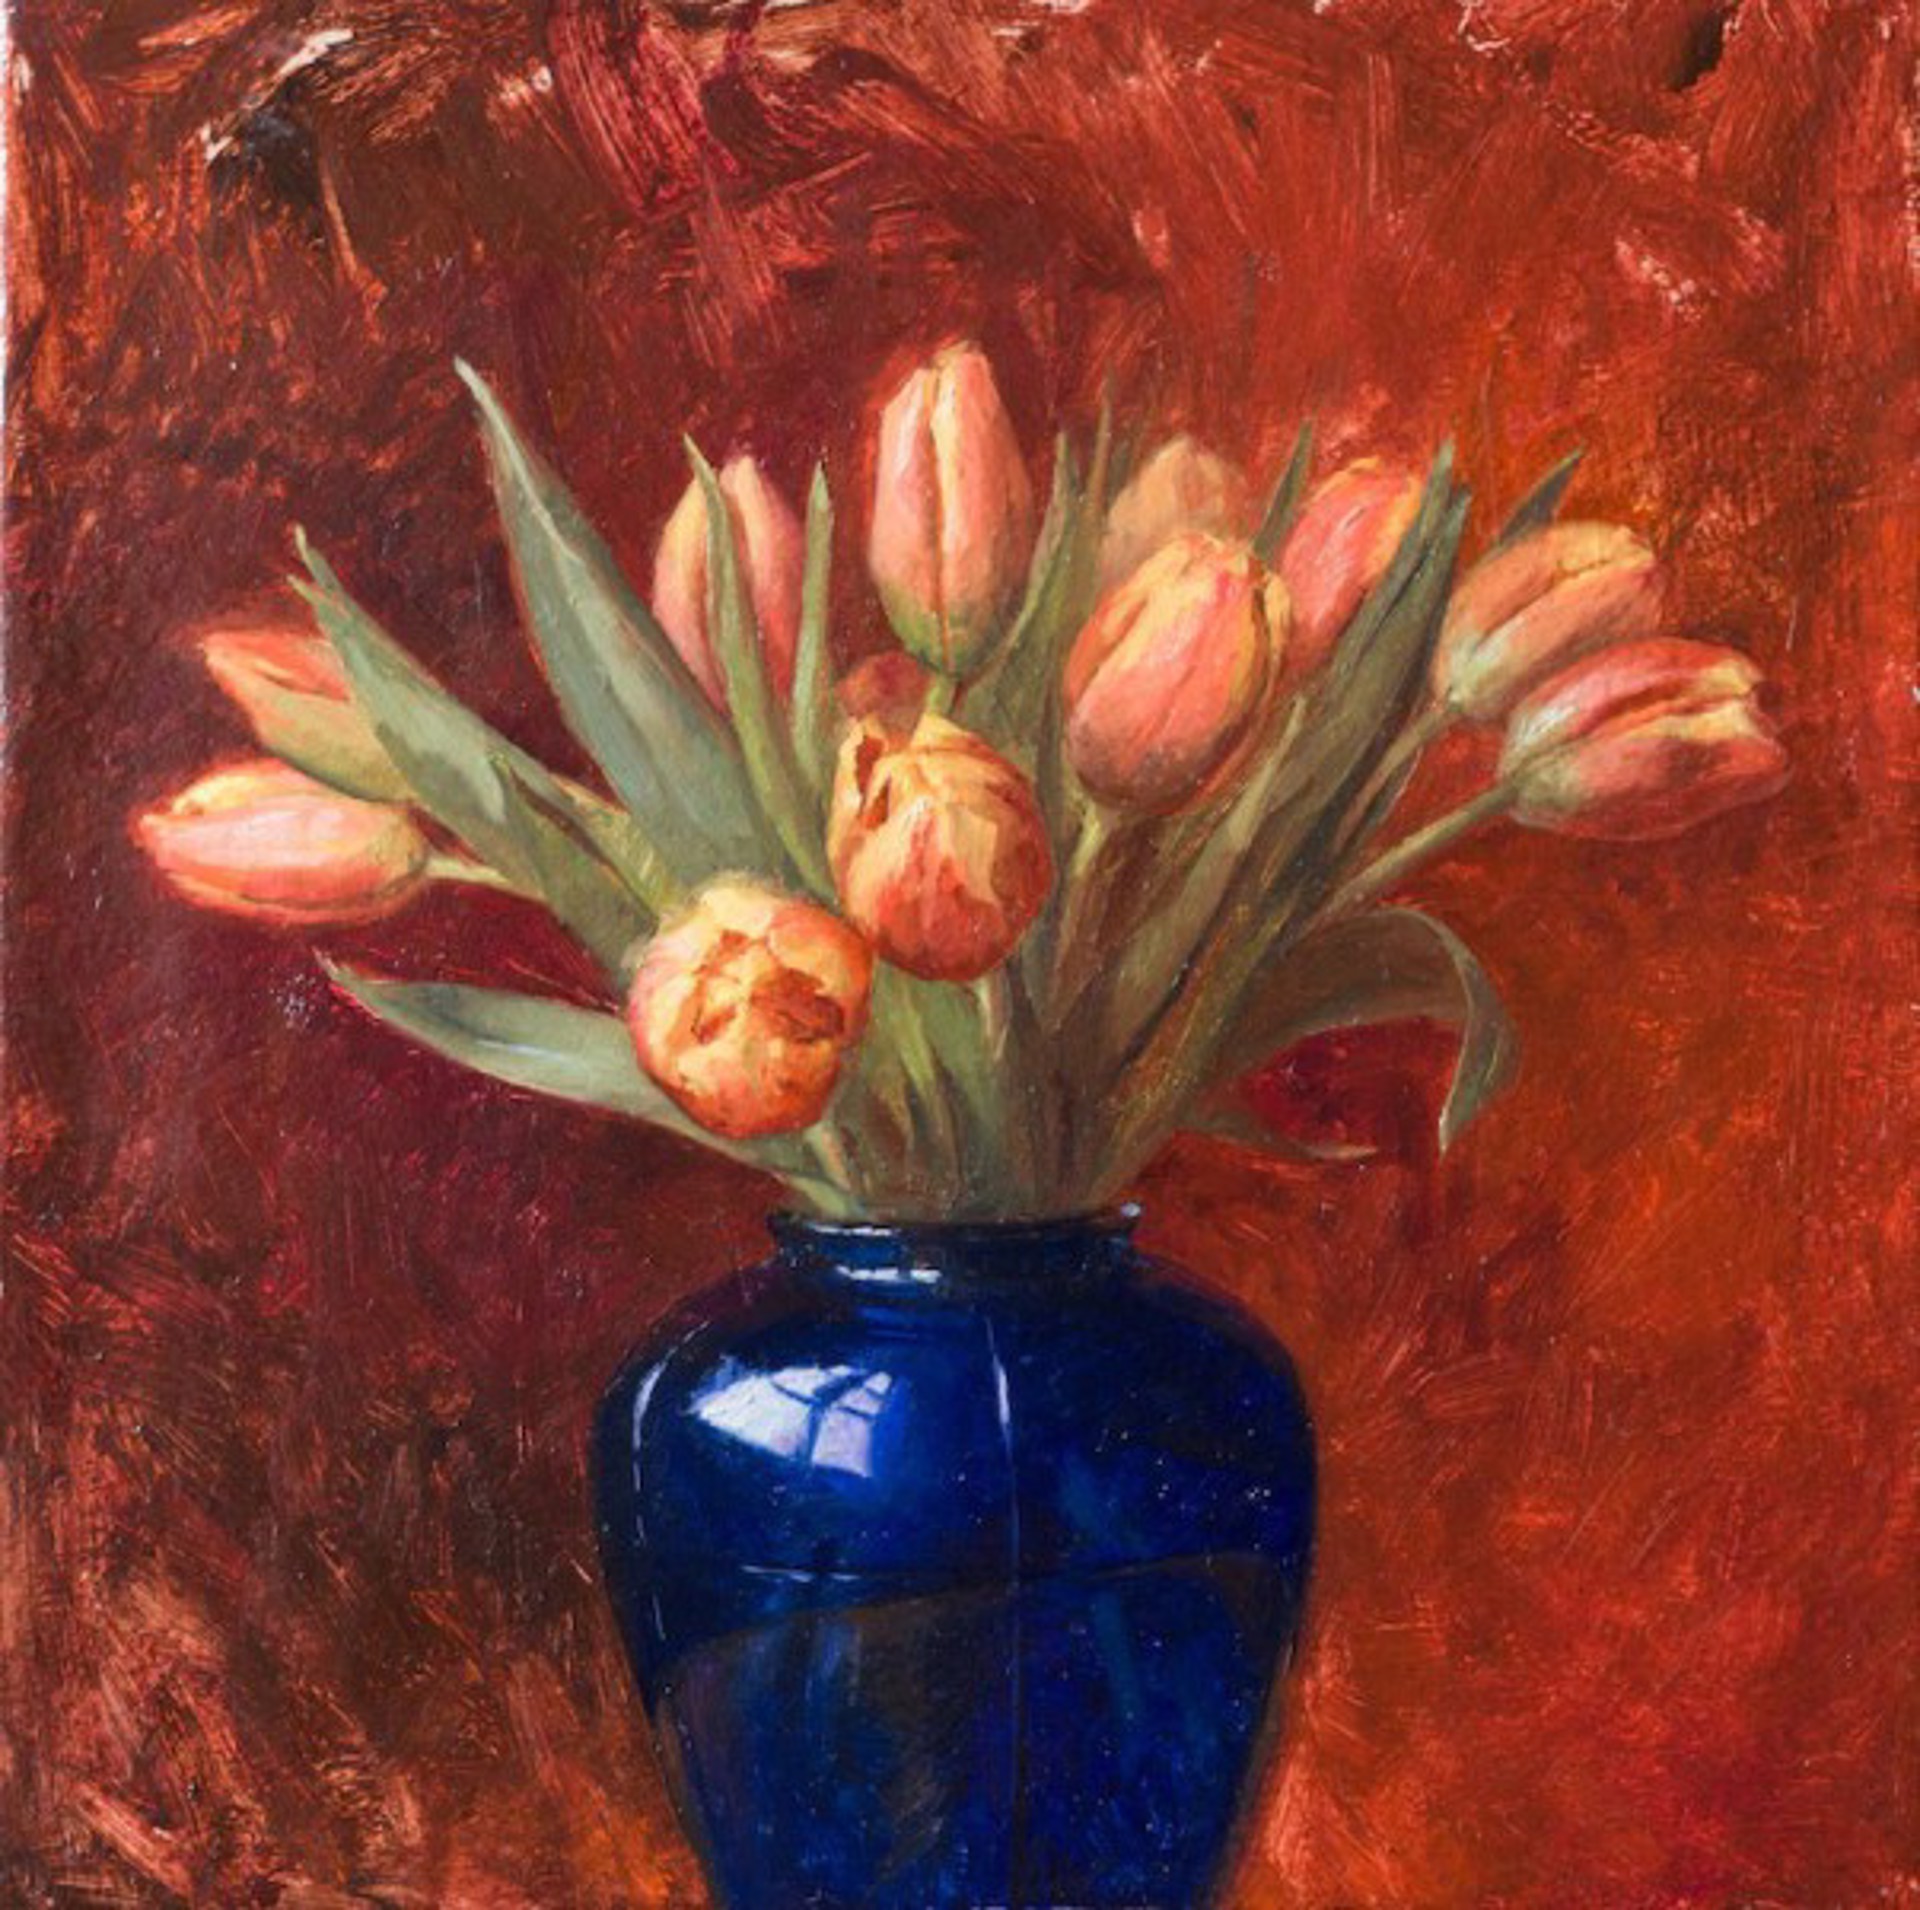 Primary Tulips by Kathryn Engberg